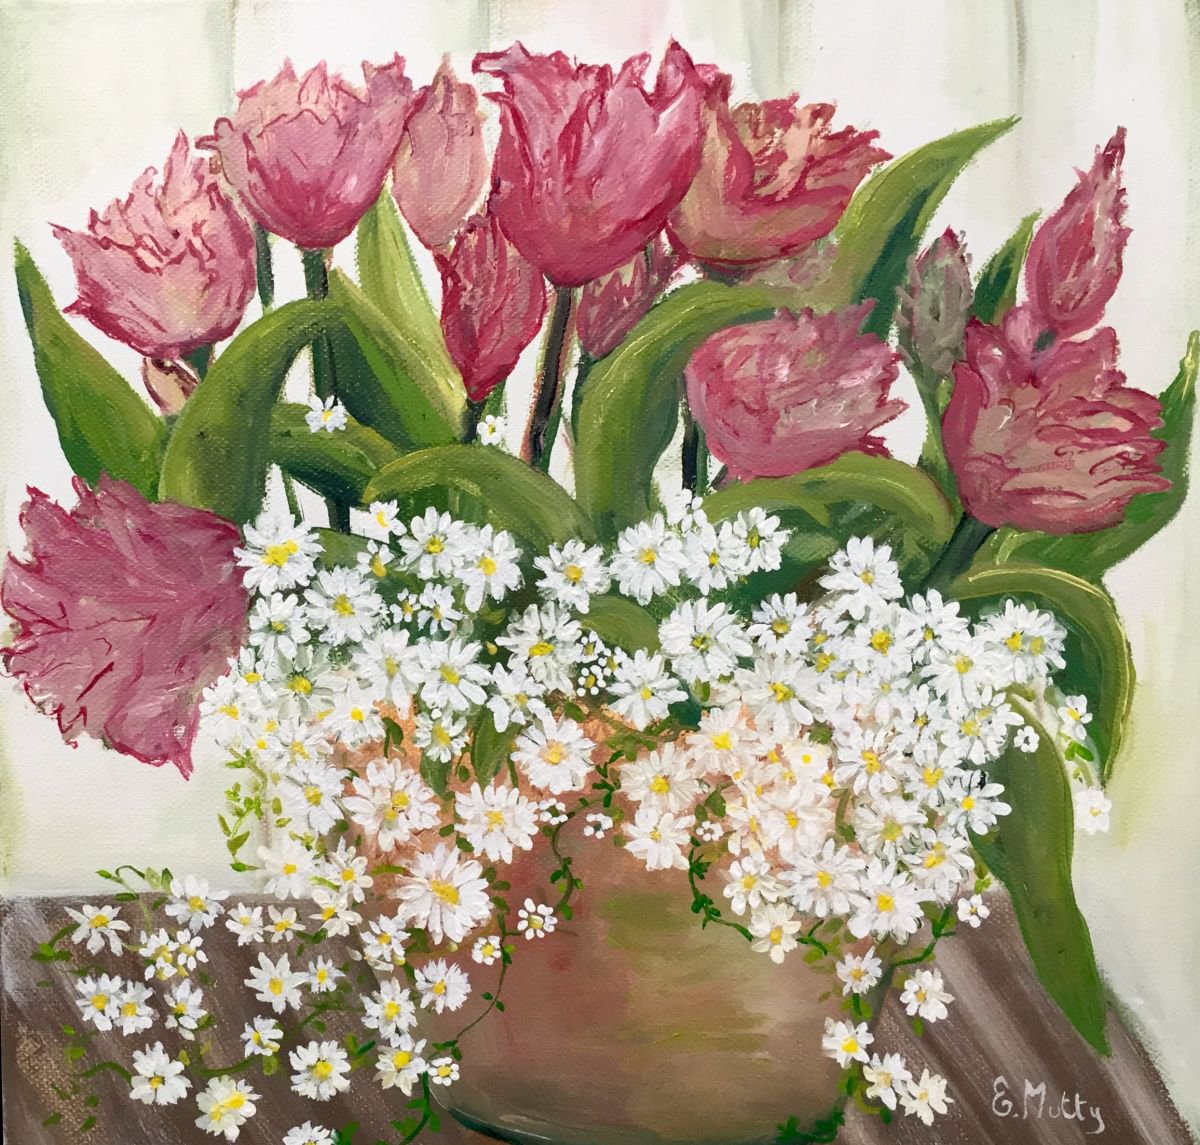 Tulips and daises by Elisabetta Mutty